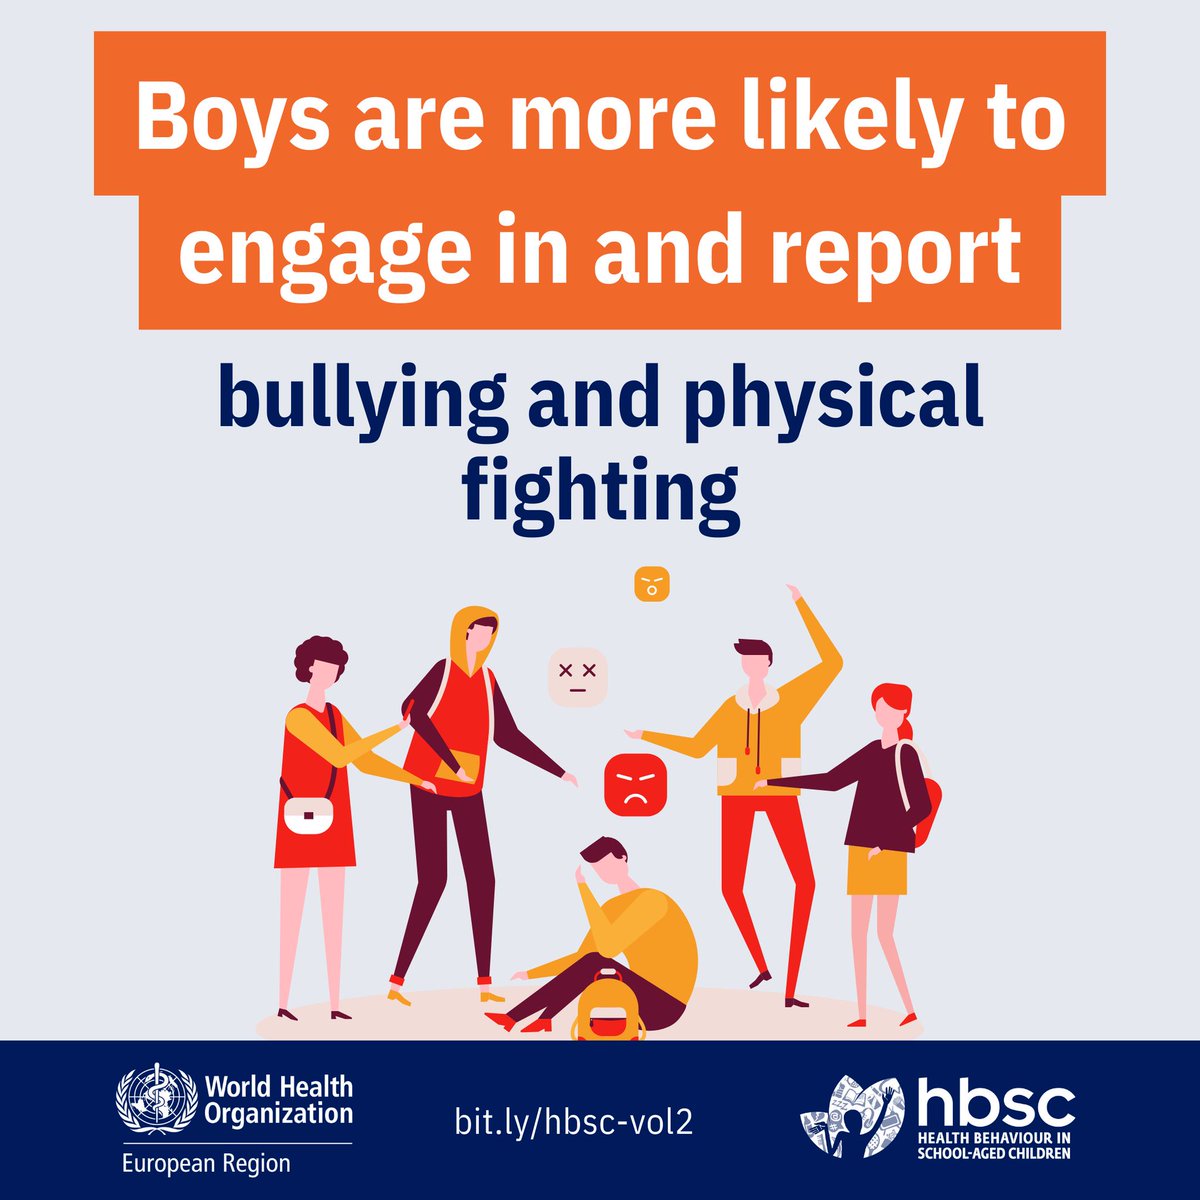 Boys report higher rates of peer violence, including bullying and fighting, underscoring the need for gender-sensitive approaches to prevention. How can we better tailor our interventions to address these disparities? bit.ly/hbsc-vol2 #StopBullying @HBSCStudy